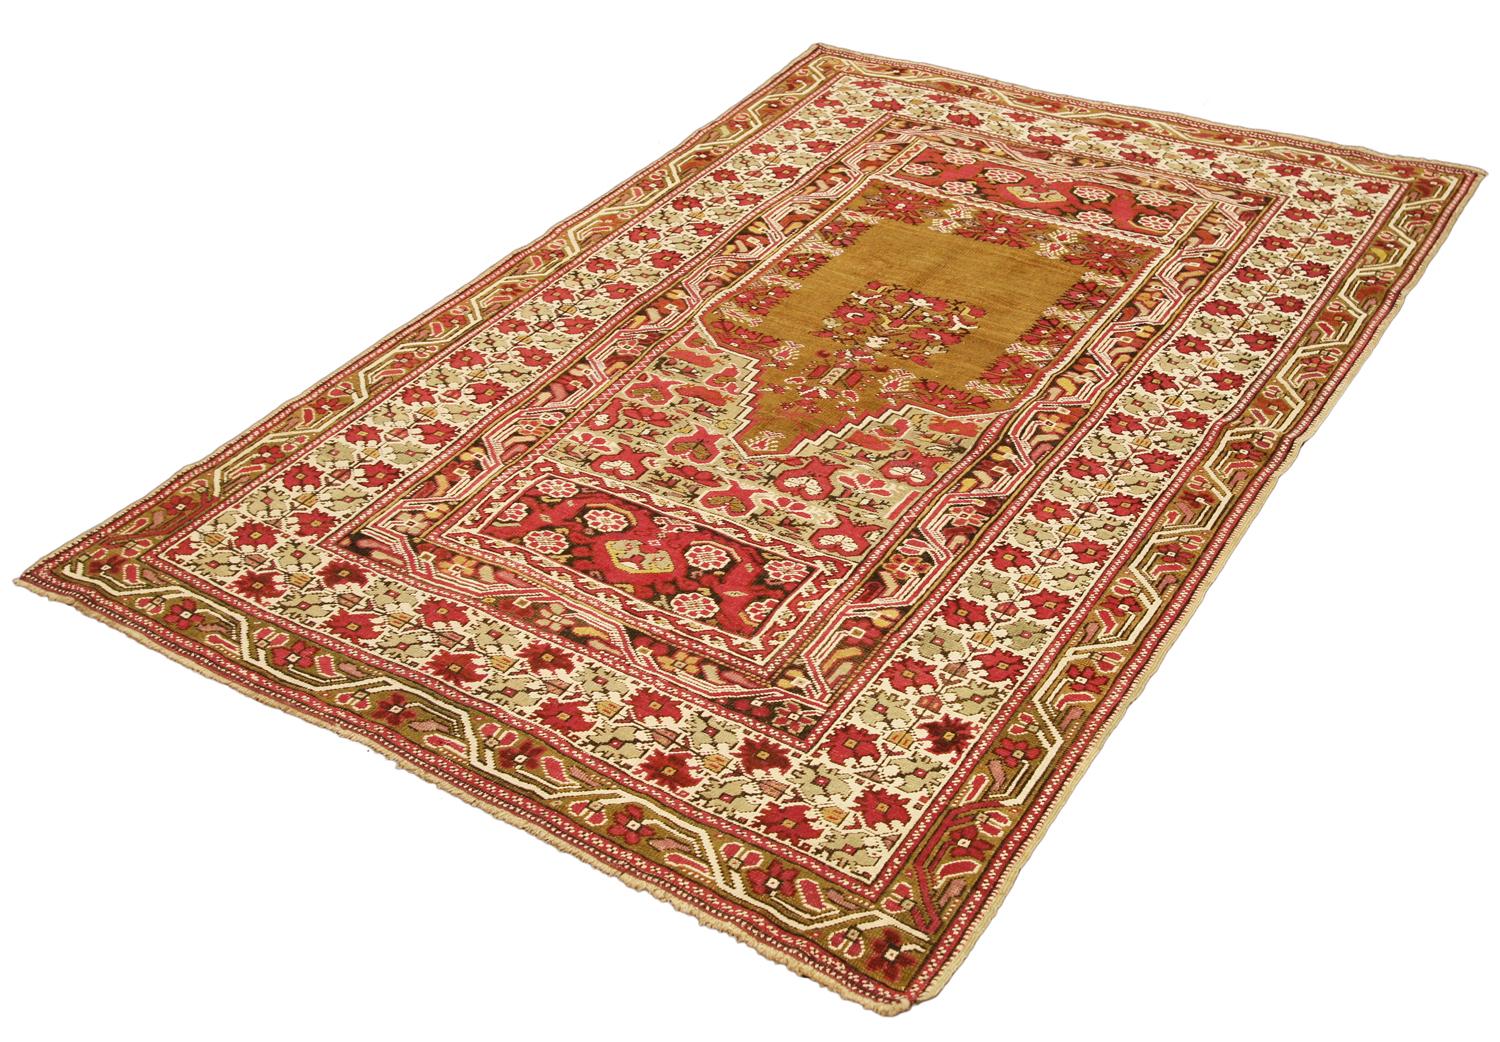 Hand-Knotted Antique Turkish Beige & Red Wool Ghiordes Rug, 1880-1900 For Sale